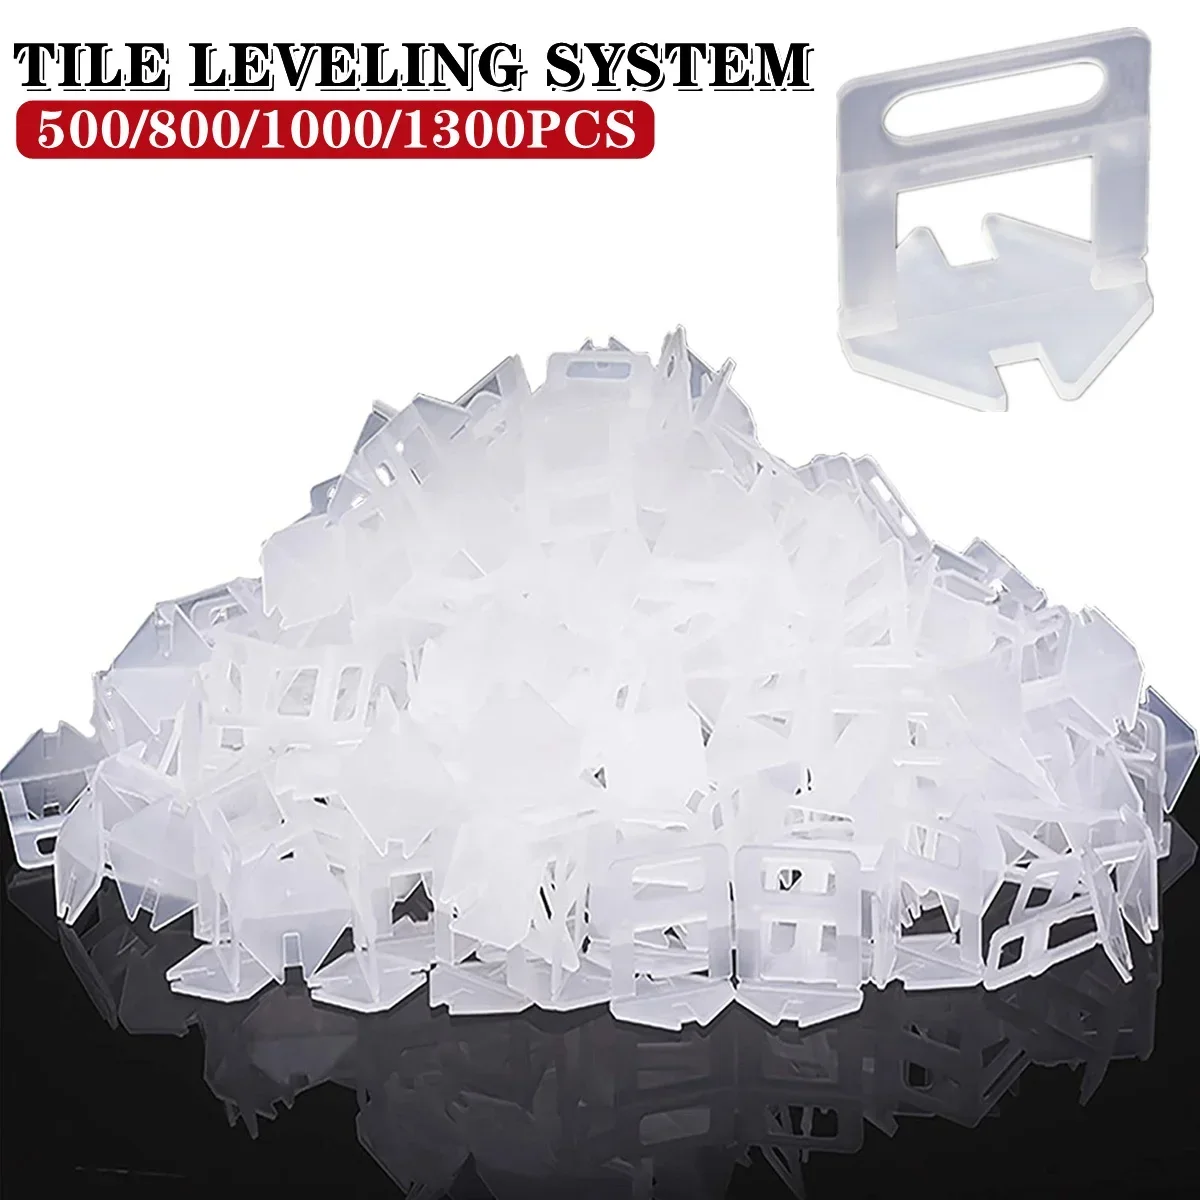 Tile Leveling System Clips 500-1300Pcs Tile Spacers 1MM-3MM for Ceramic Wall Tile Laying Construction Tools  Leveler Spacers 100pcs clips 100pcs wedges 1 piece plier plastic tile spacers tiling tools 201 pcs tile leveling system 1mm 1 5mm 2mm 2 5mm 3mm